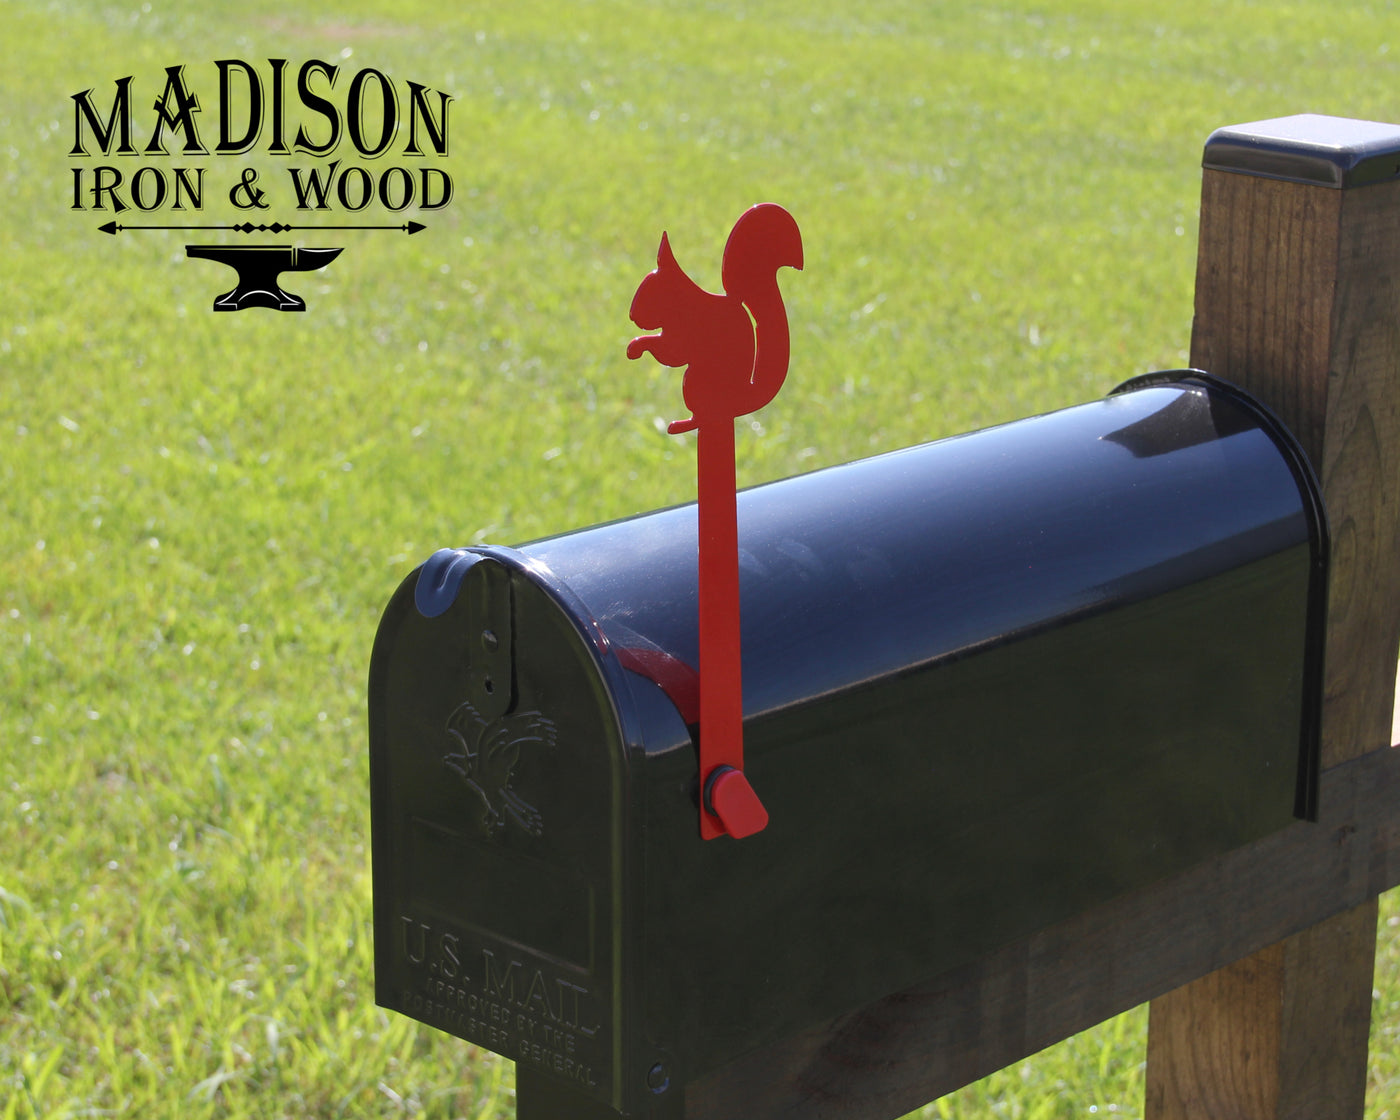 Squirrel Mailbox Flag - Madison Iron and Wood - Mailbox Post Decor - metal outdoor decor - Steel deocrations - american made products - veteran owned business products - fencing decorations - fencing supplies - custom wall decorations - personalized wall signs - steel - decorative post caps - steel post caps - metal post caps - brackets - structural brackets - home improvement - easter - easter decorations - easter gift - easter yard decor